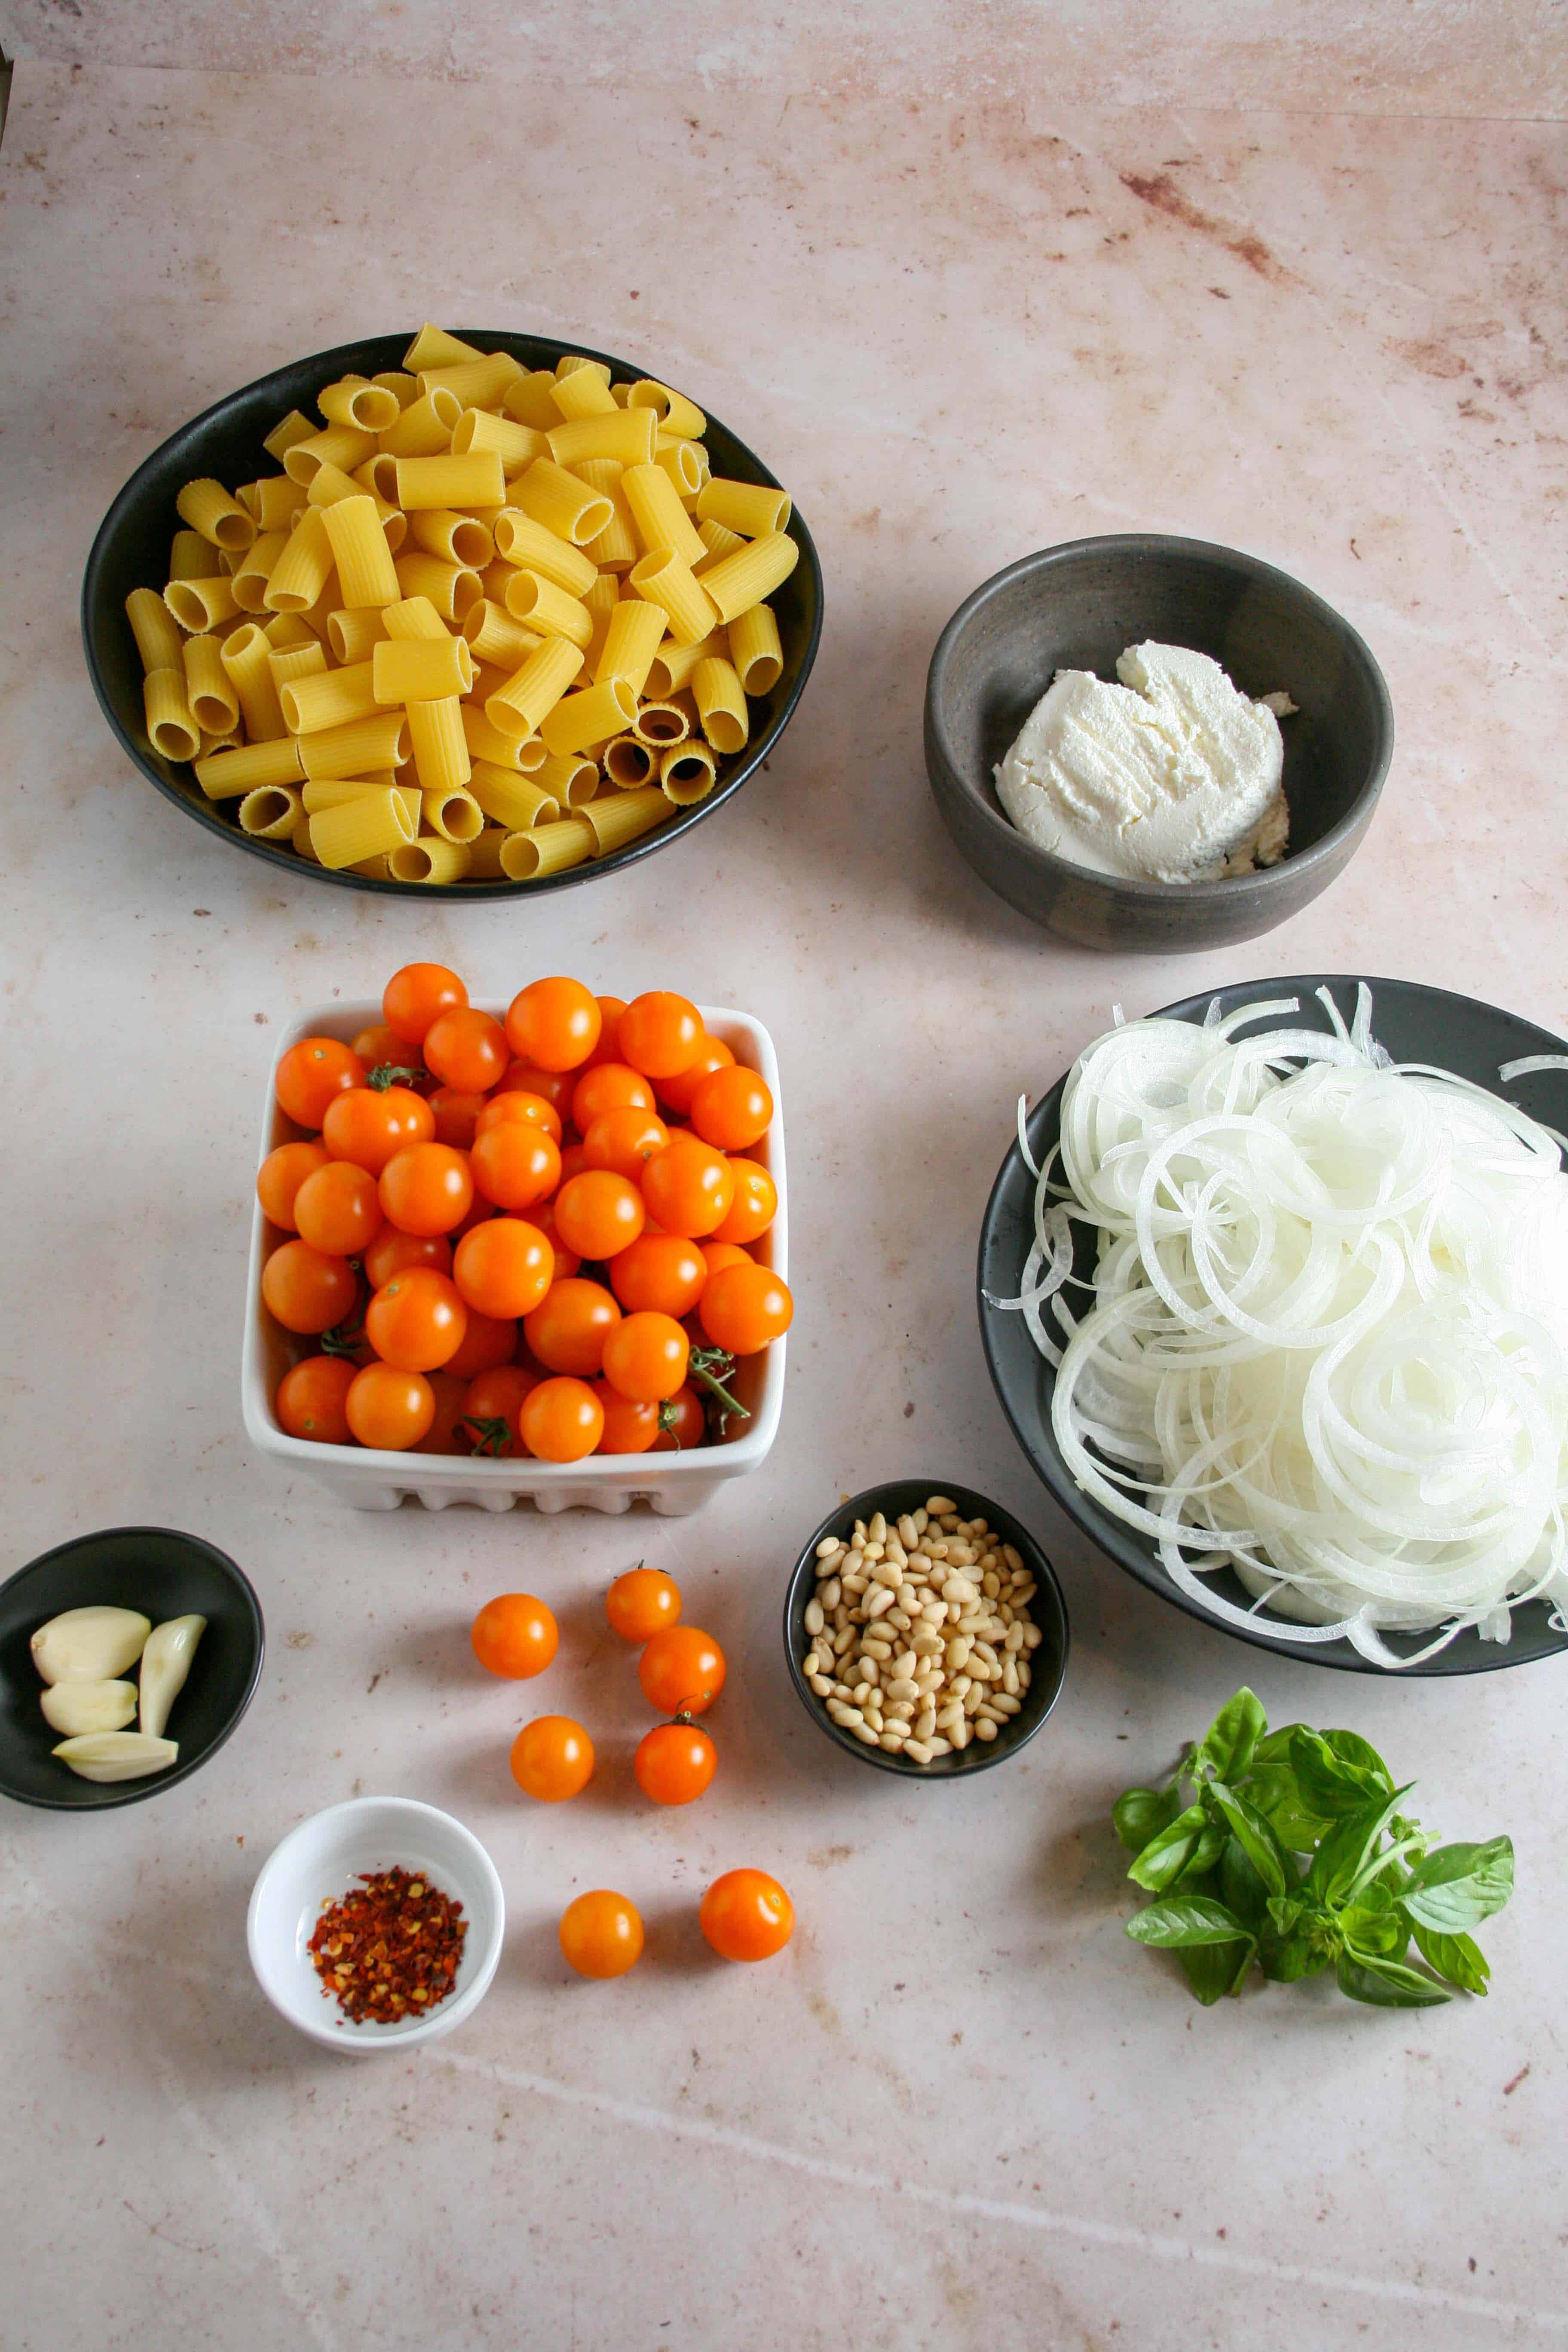 Ingredients for caramelized onions and sun gold tomato pasta